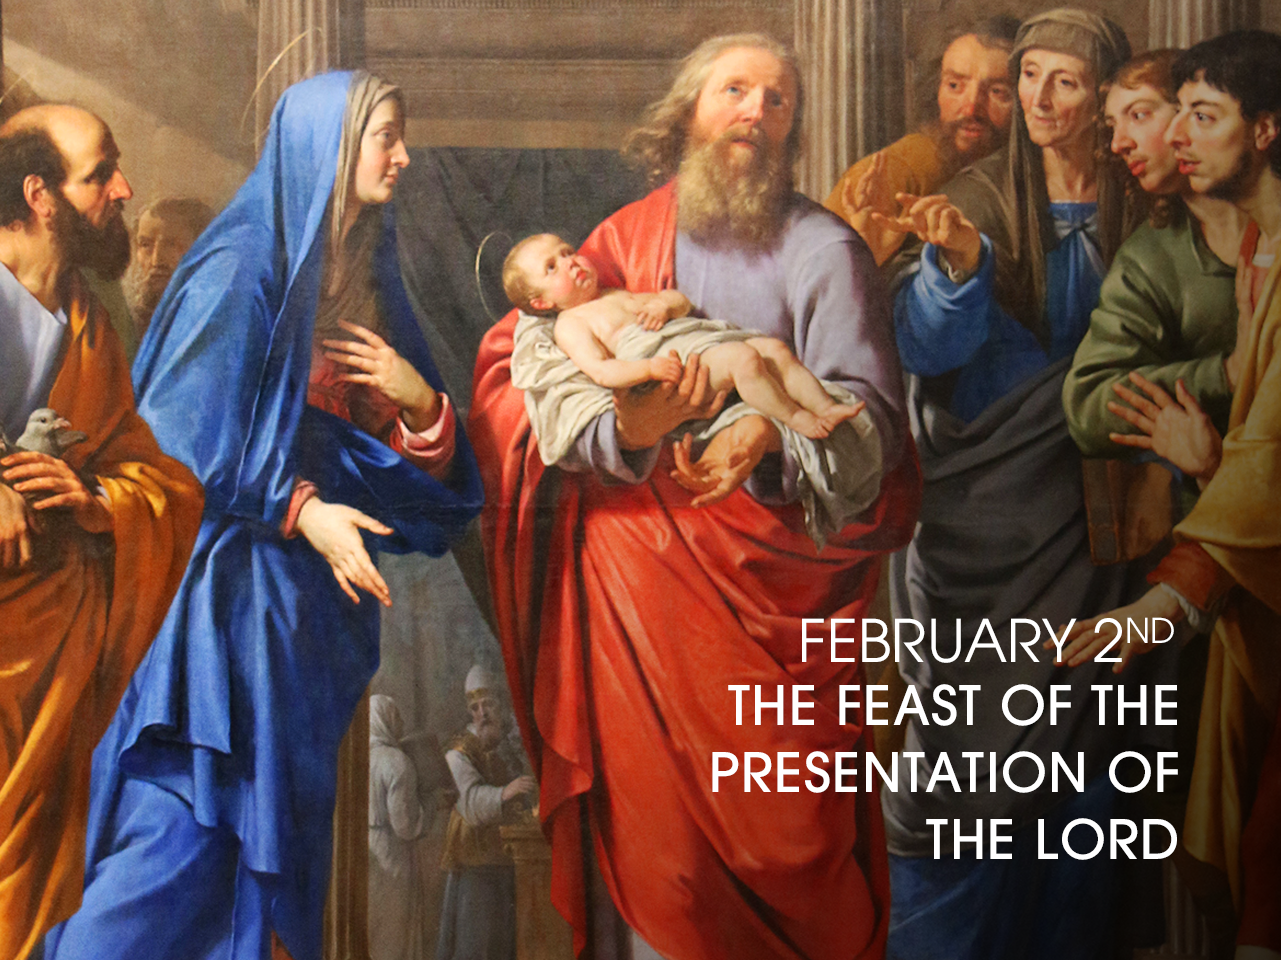 Feast of the Presentation of the Lord